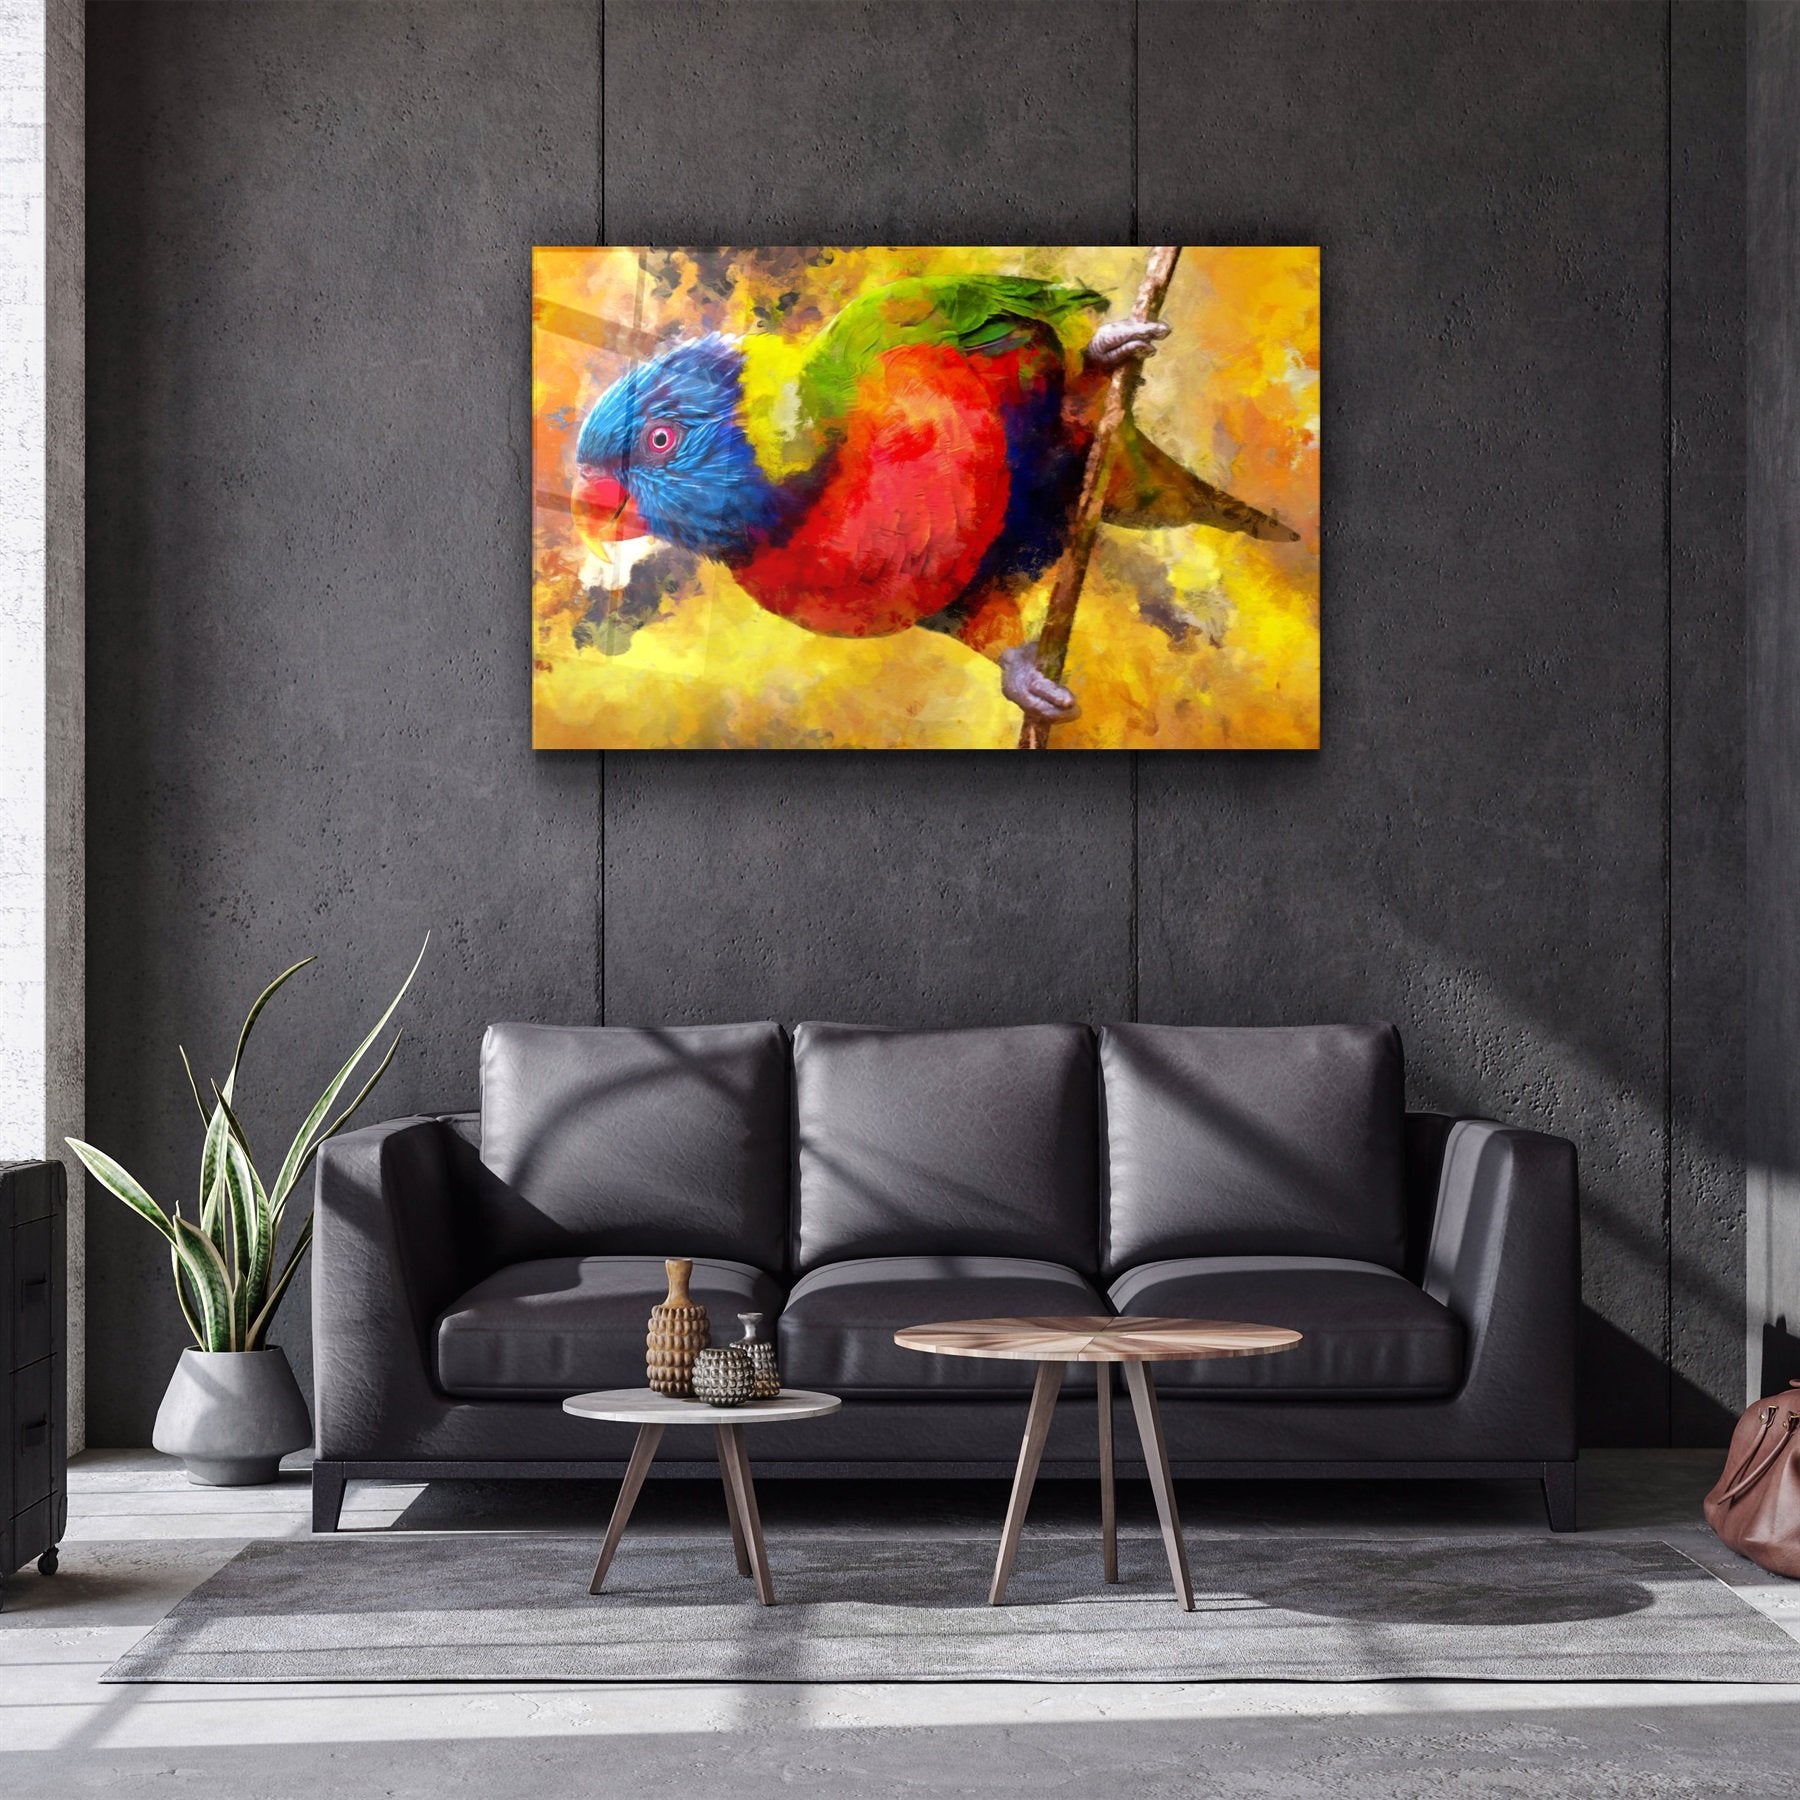 ・"Abstract Colorful Parrot"・Glass Wall Art